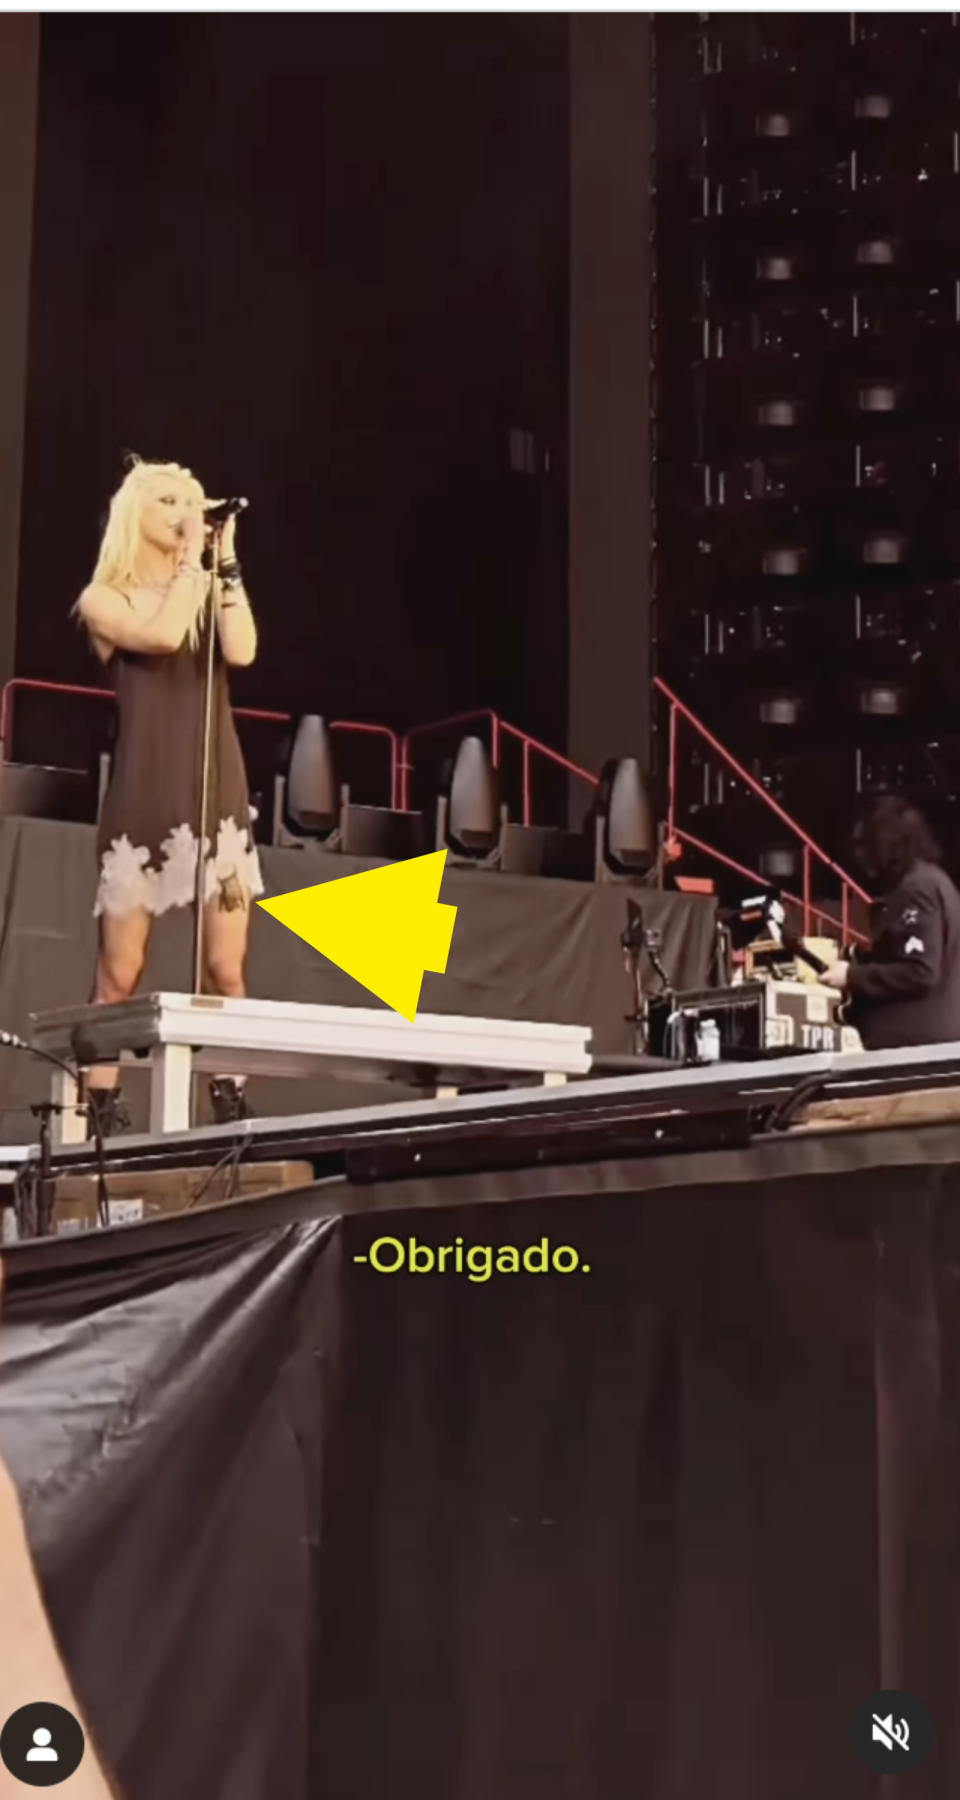 Taylor Momsen performs on stage, dressed in a stylish dress with intricate patterns. The word "Obrigado" is displayed in yellow text below her